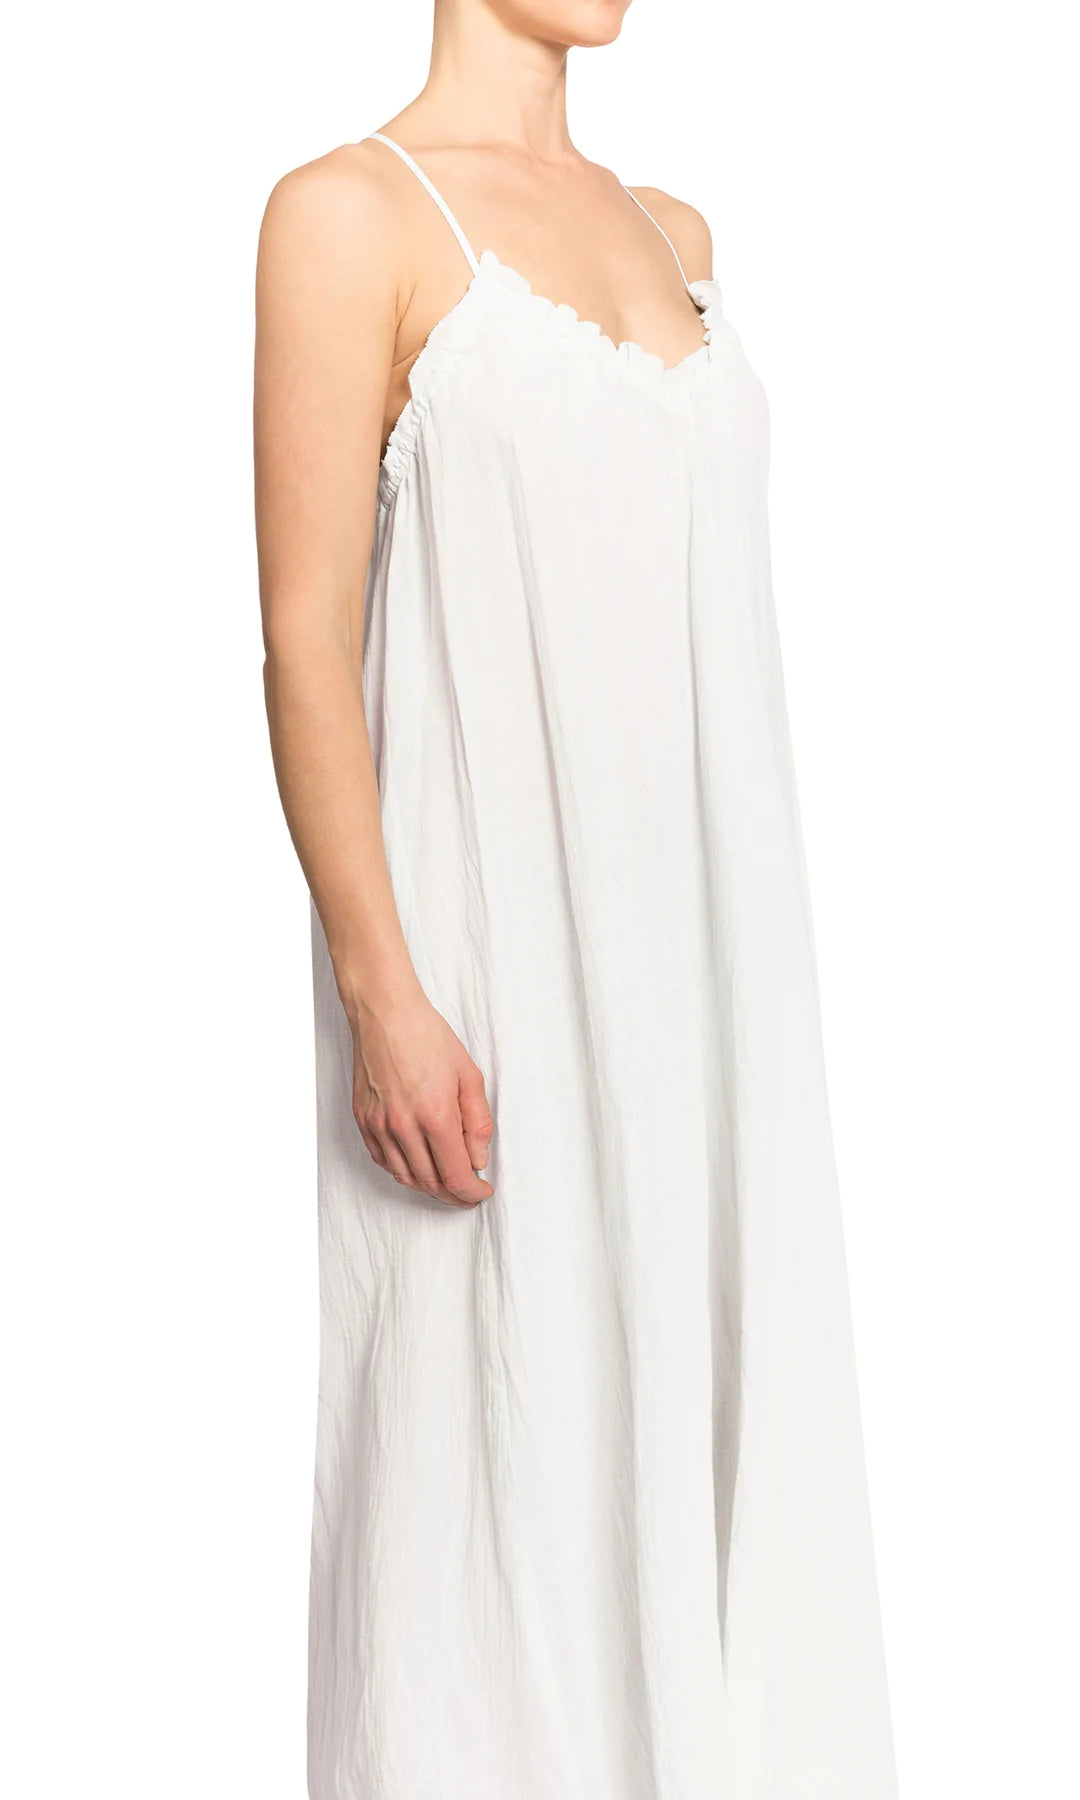 Grace Victorian style nightgown - Everyday Ritual - Gigi's